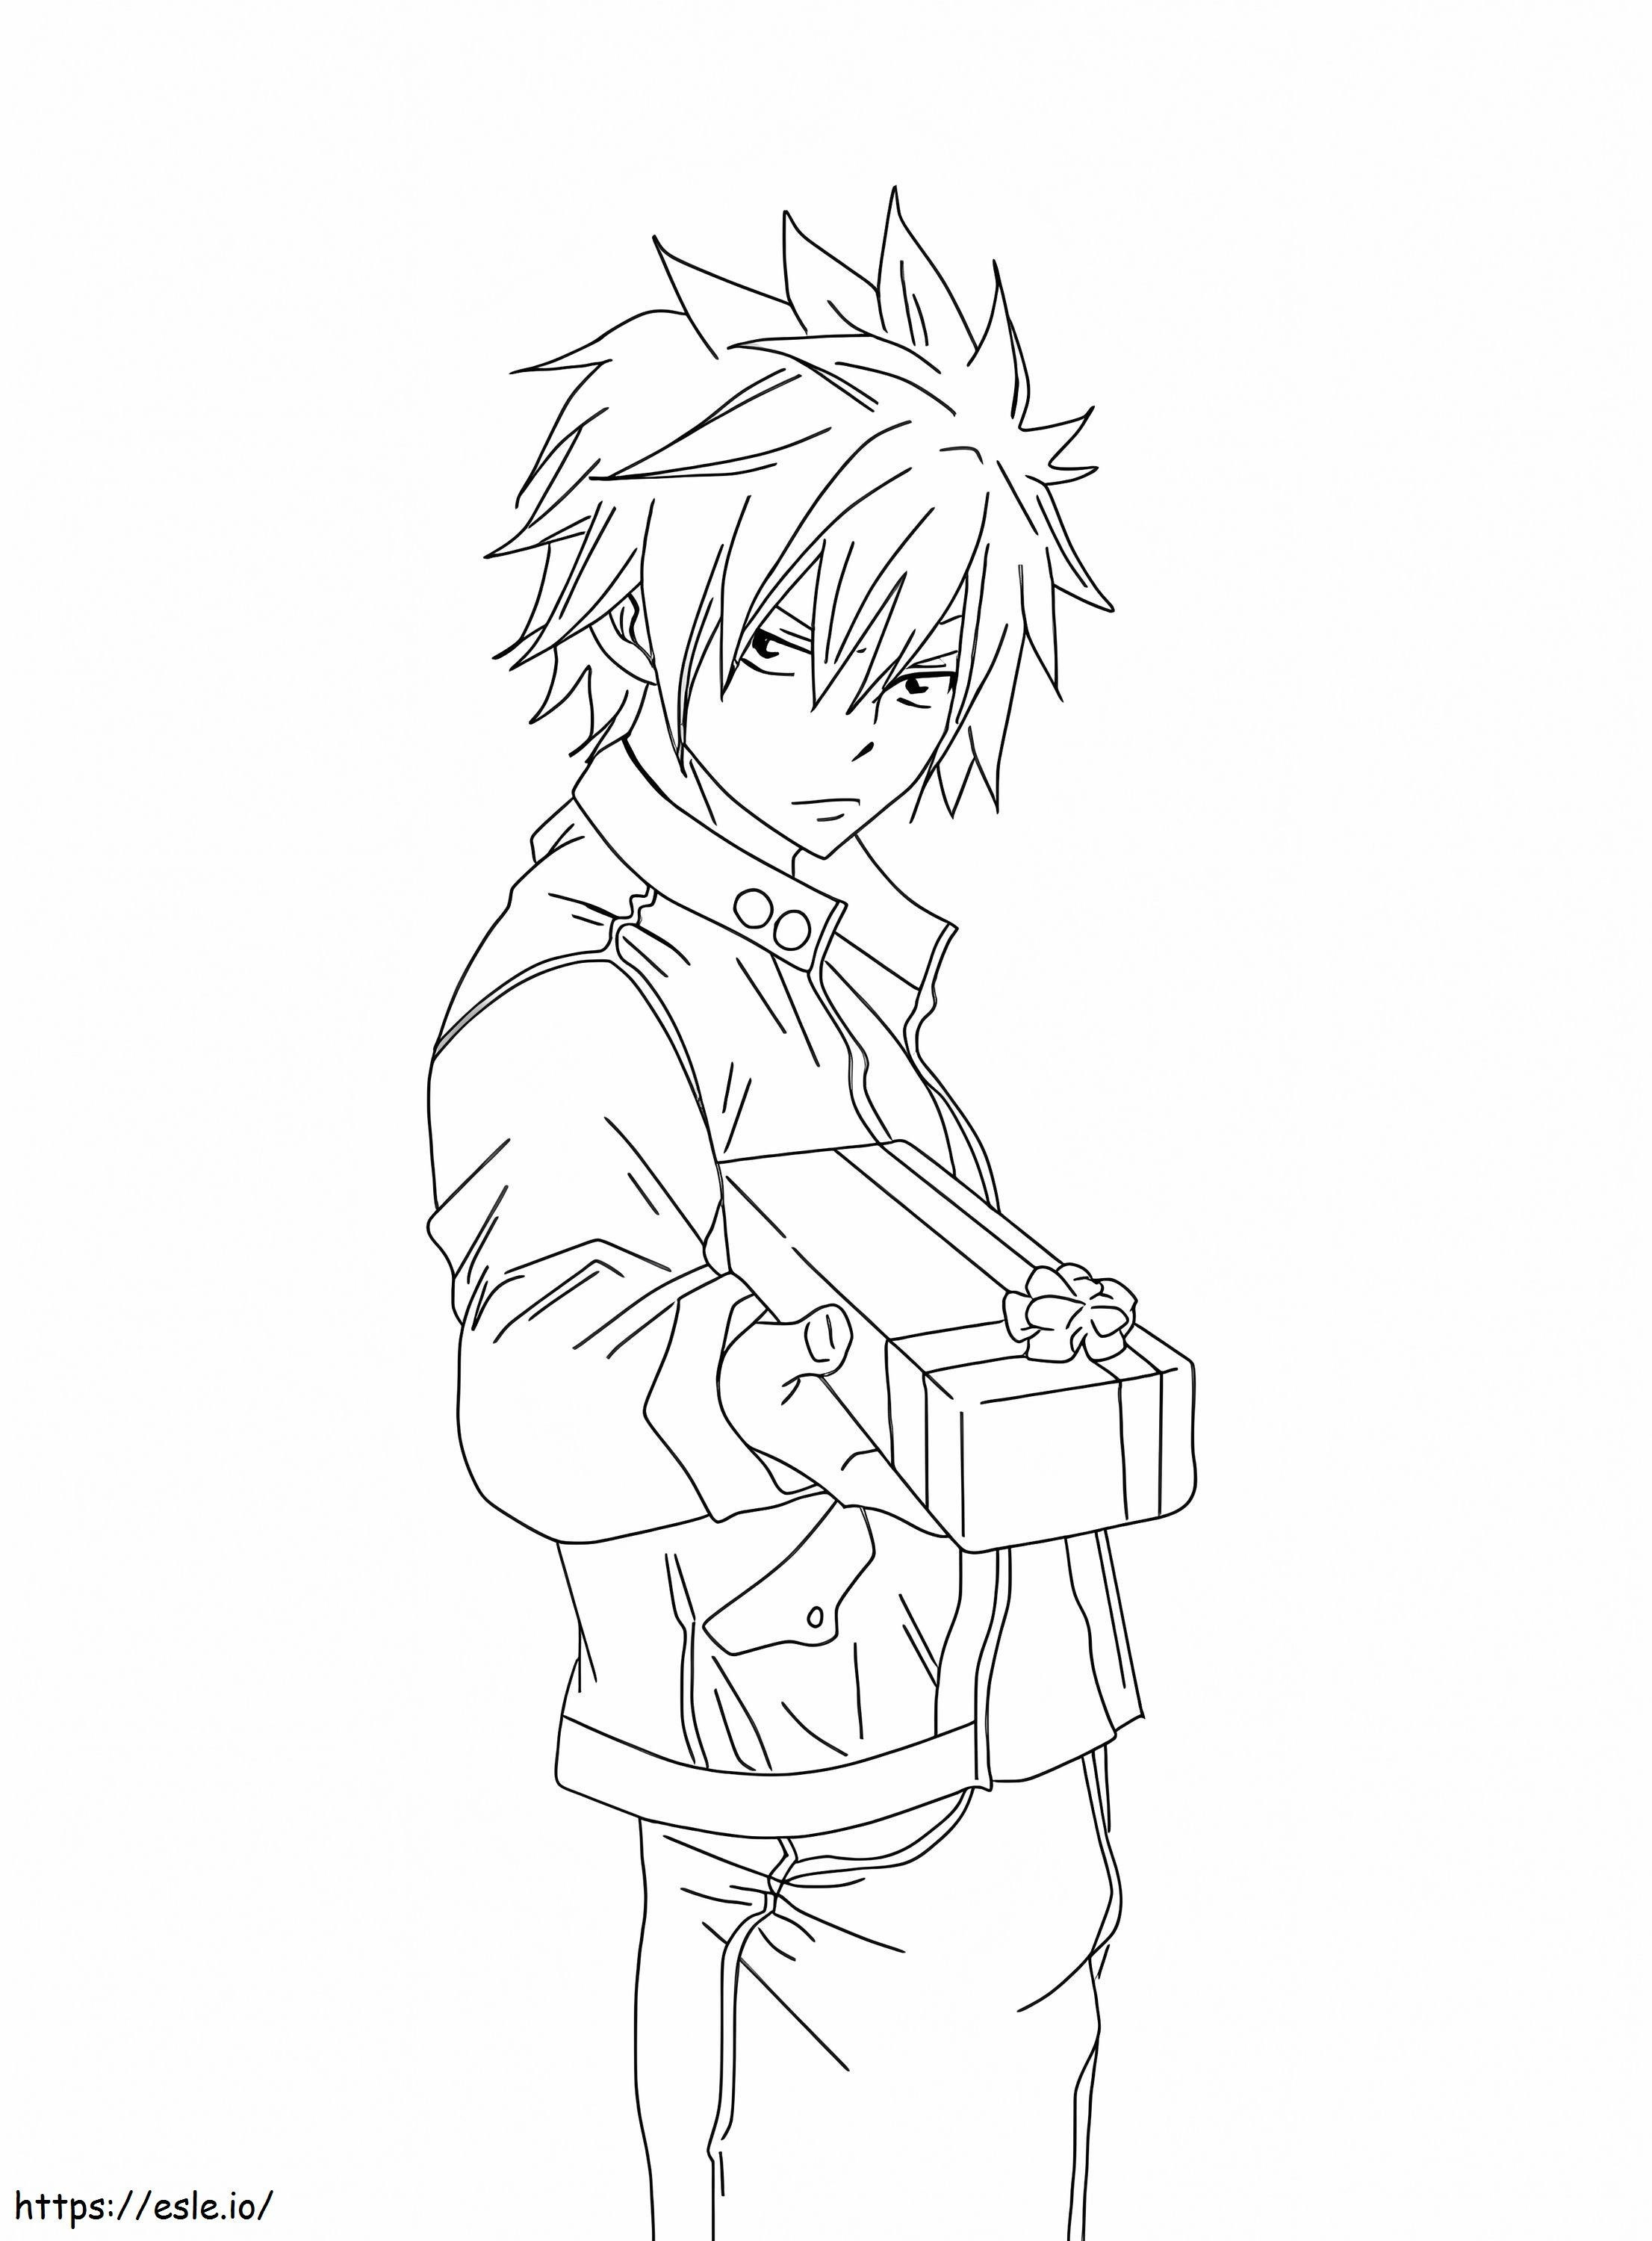 Grey Fullbuster De Fairy Tail 755X1024 coloring page